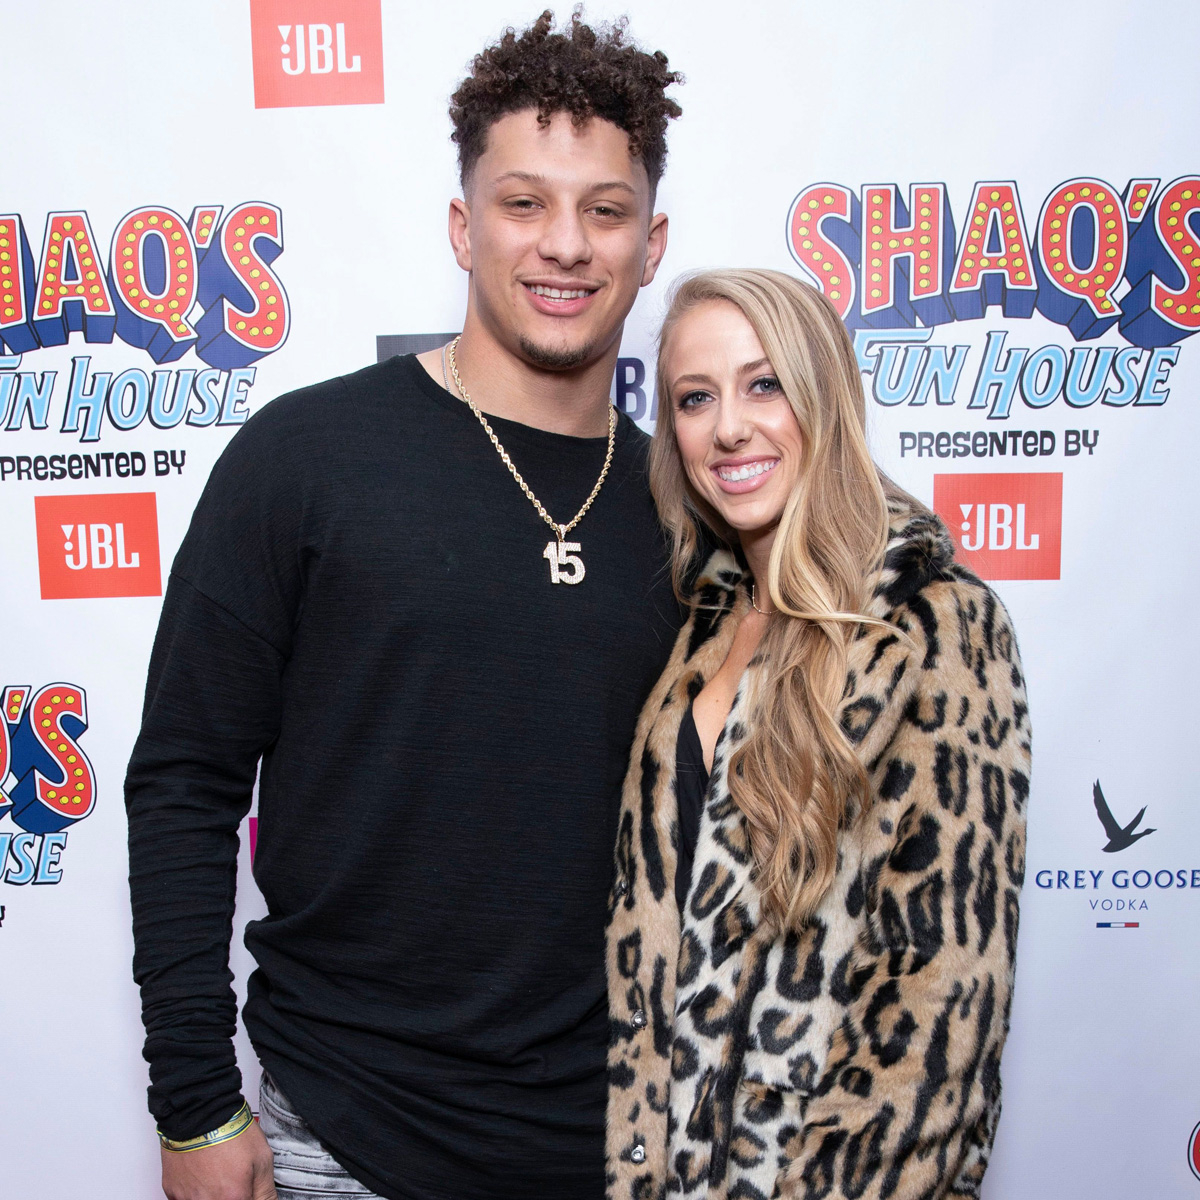 Patrick Mahomes and fiancée share new photo of 2-month-old daughter